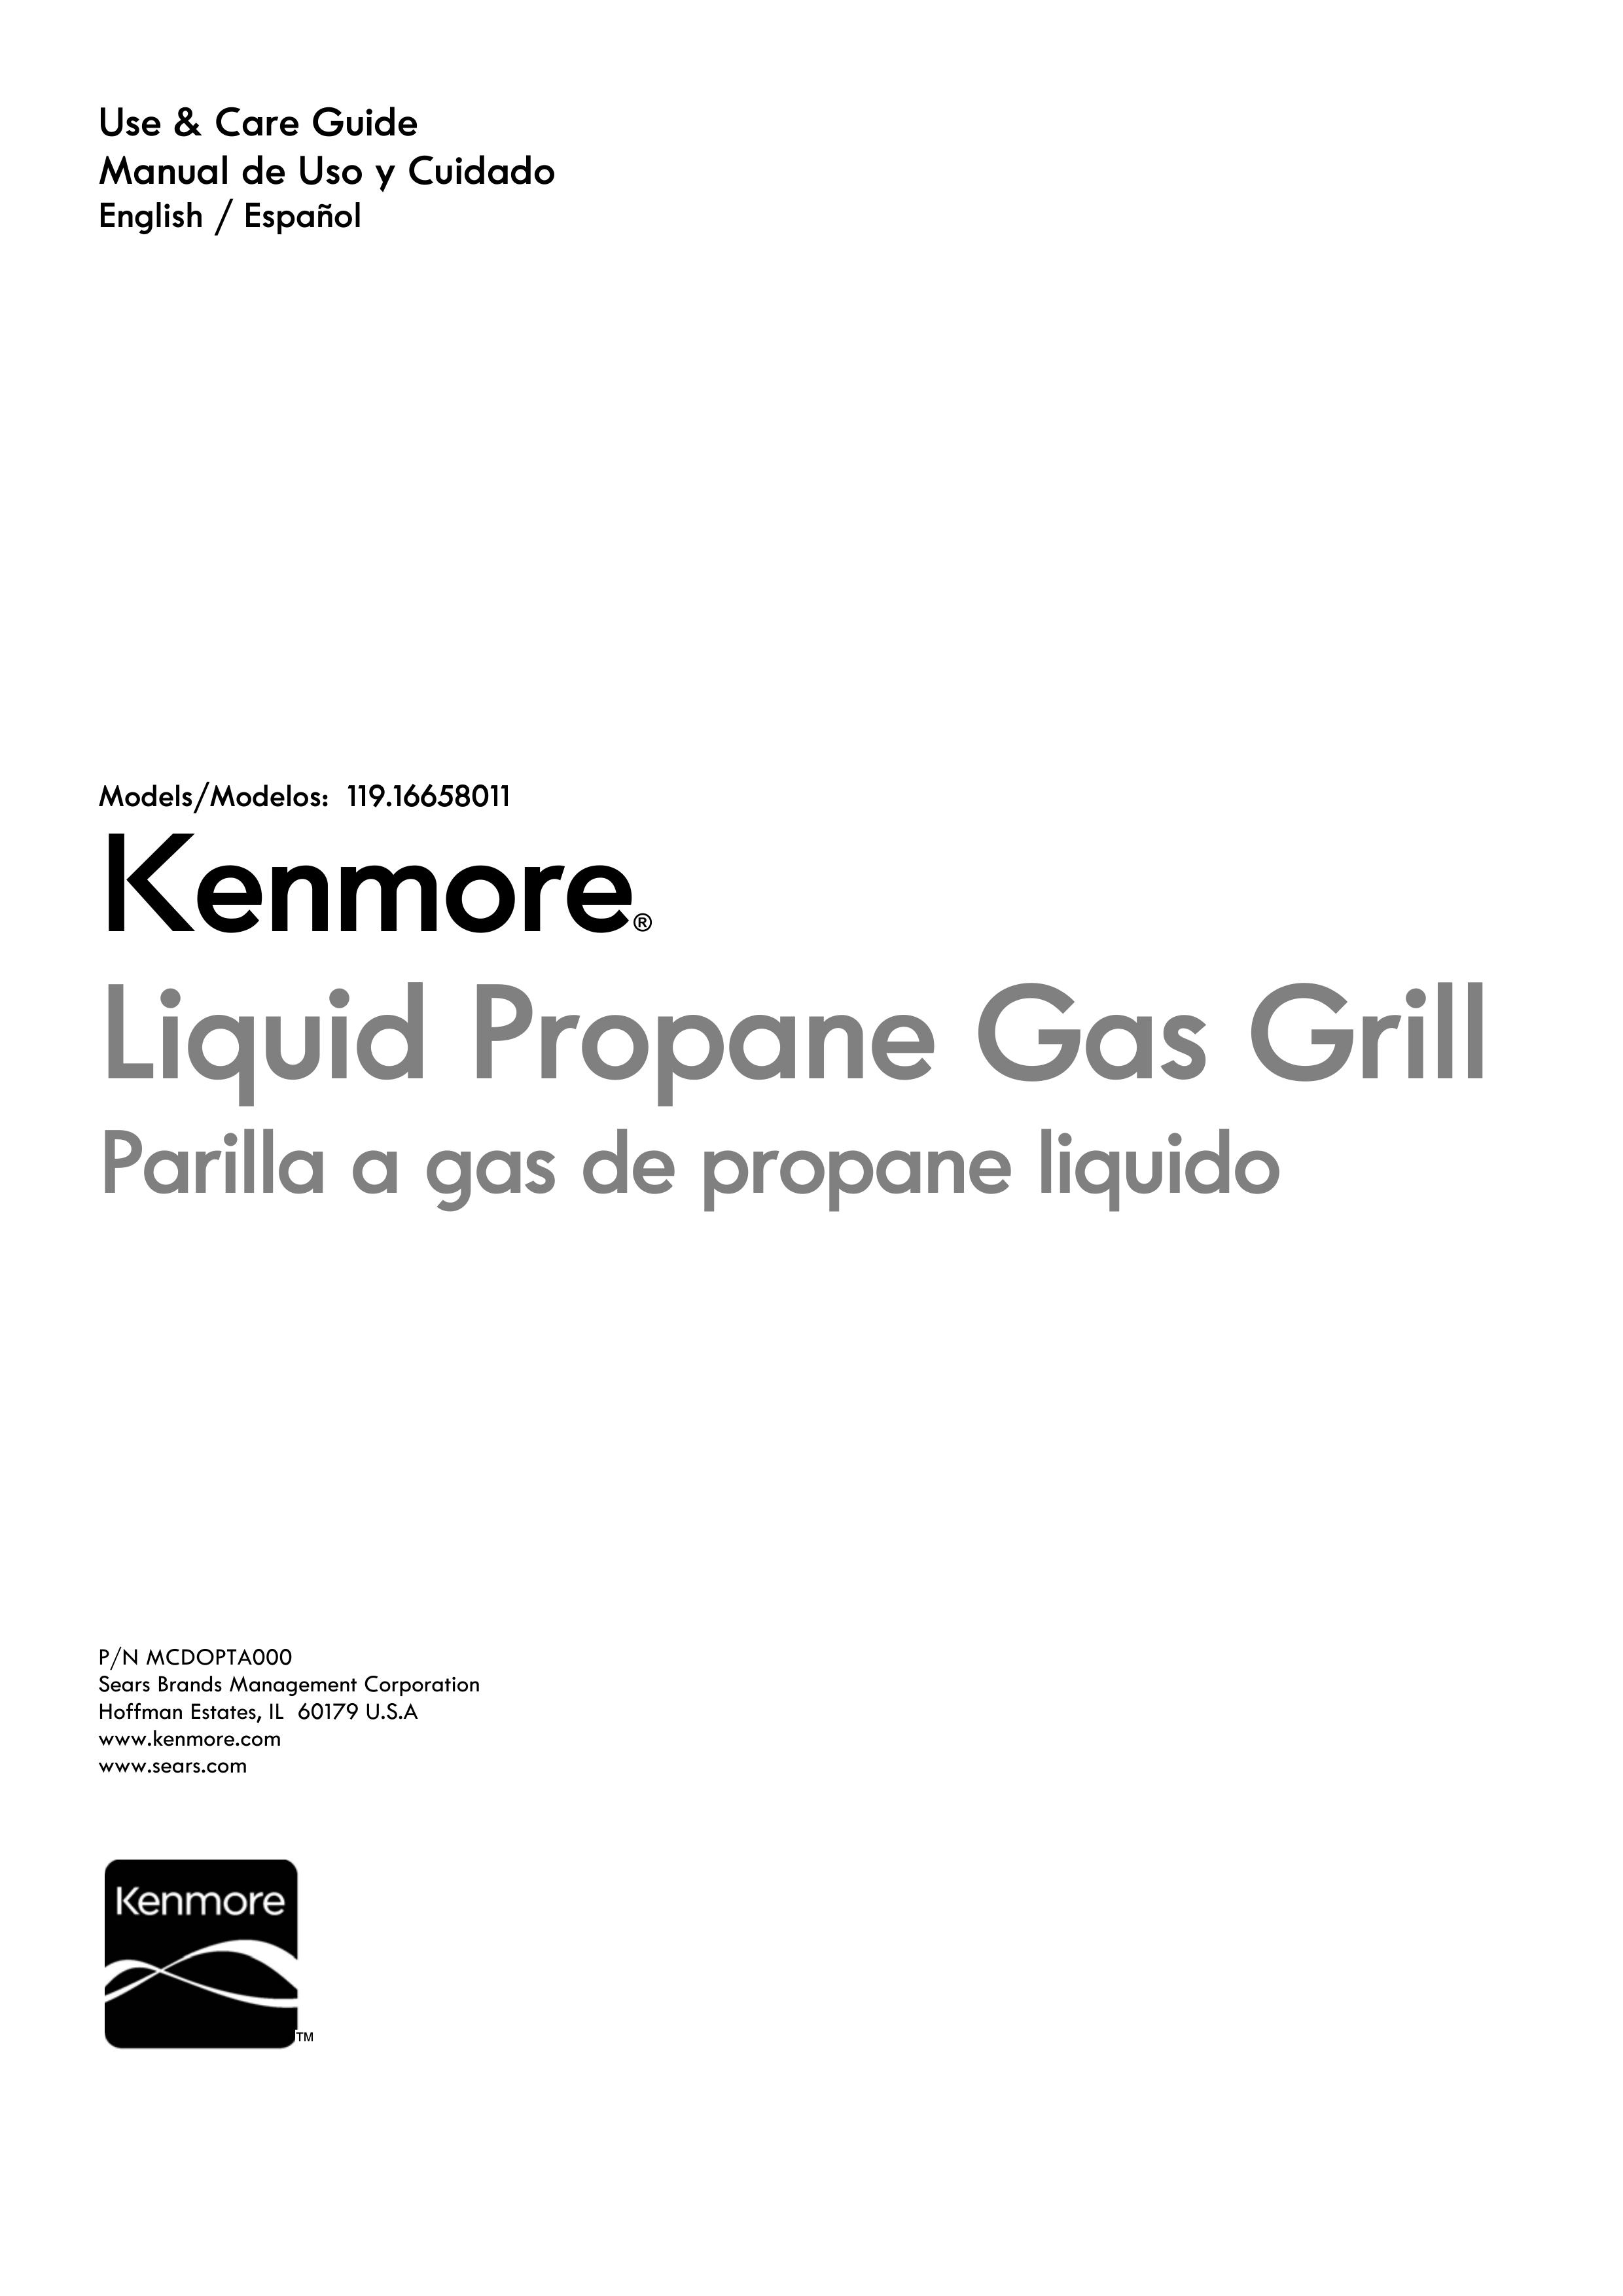 Kenmore 119.1665801 Gas Grill User Manual